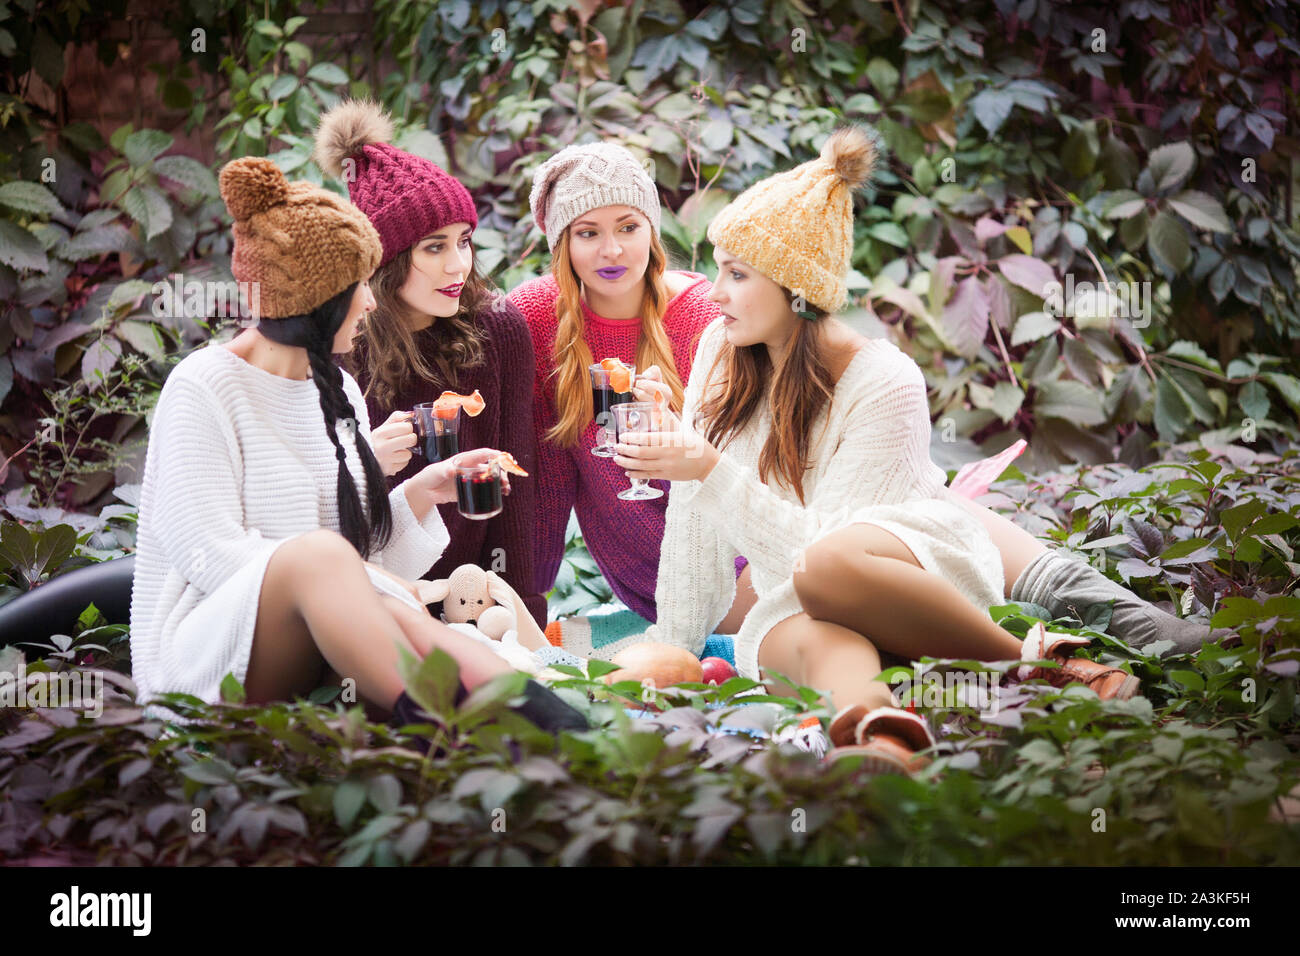 Young women drink mulled wine in autumn park. Sunny autumn day. Outdoors lifestyle fashion portrait. Positive emotions. Stock Photo